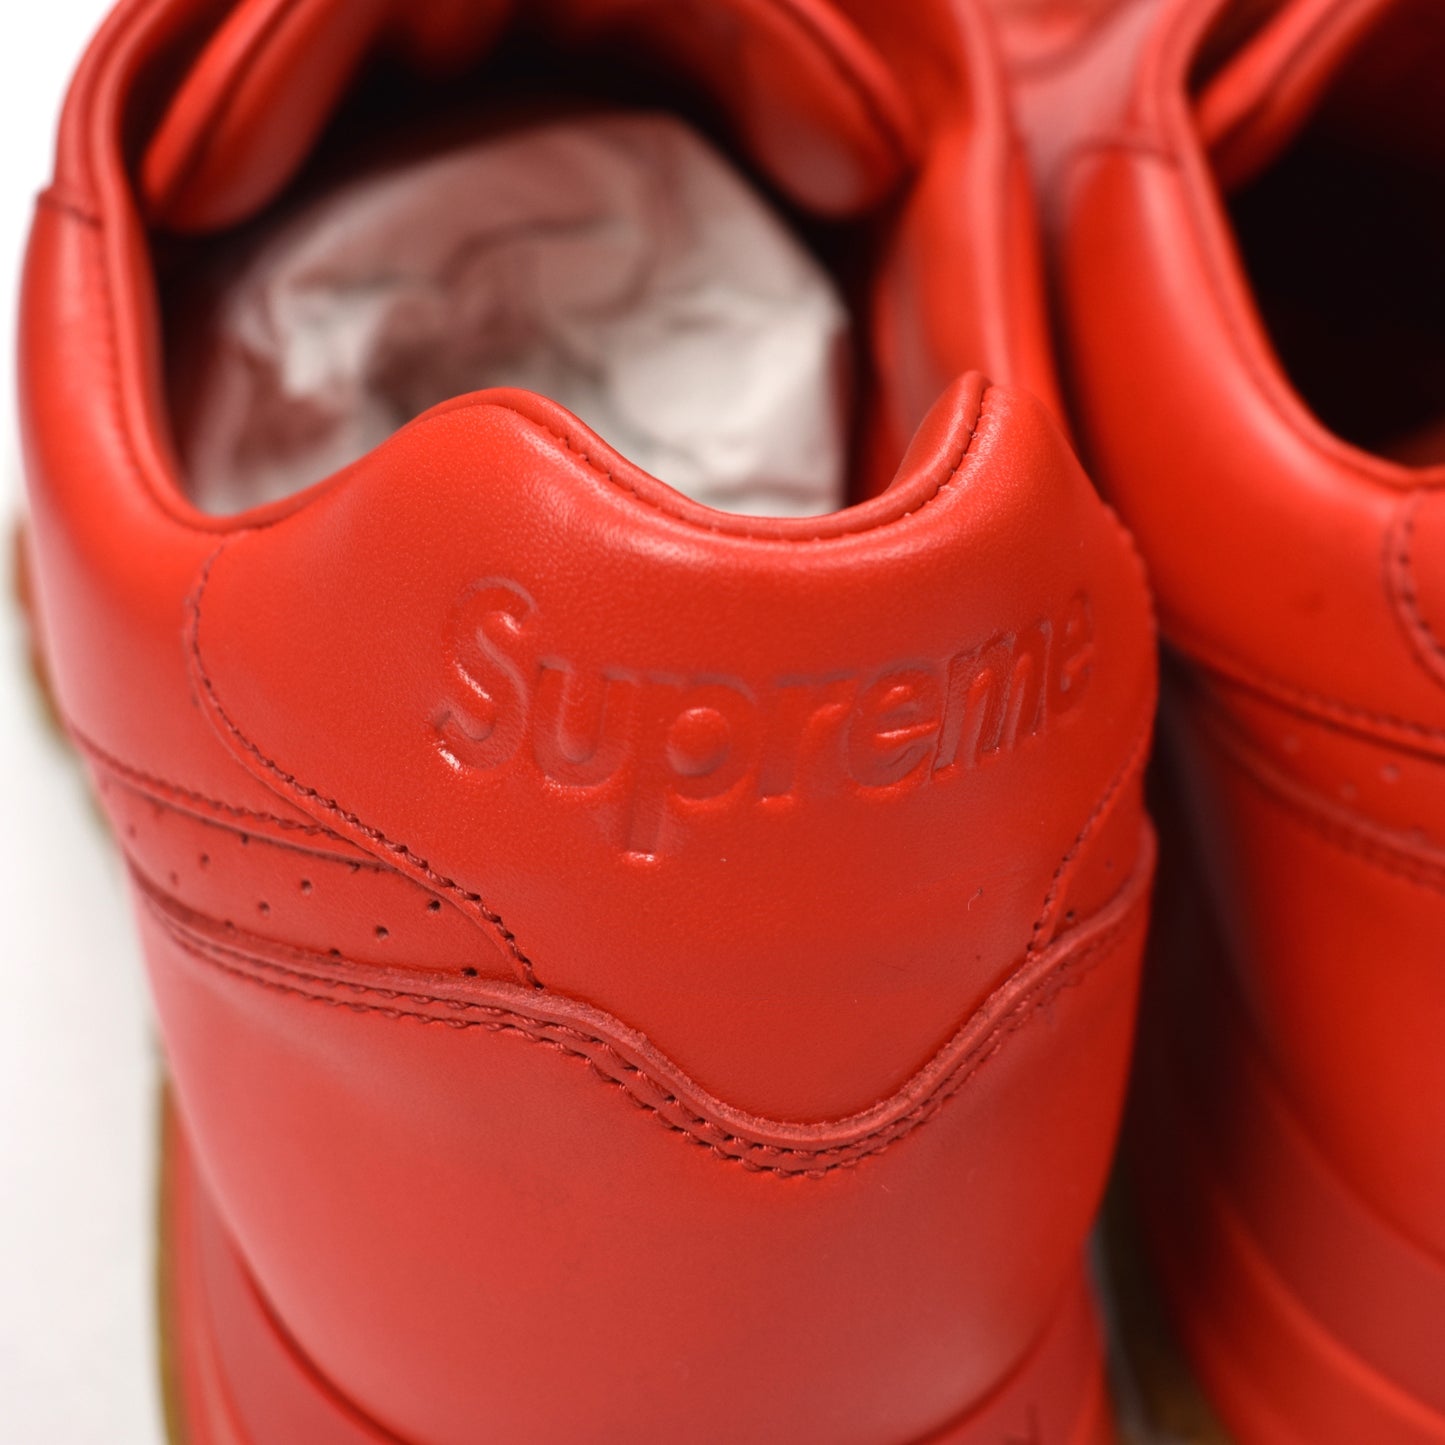 Louis Vuitton x Supreme Red Leather Run Away Sneakers - Size 8